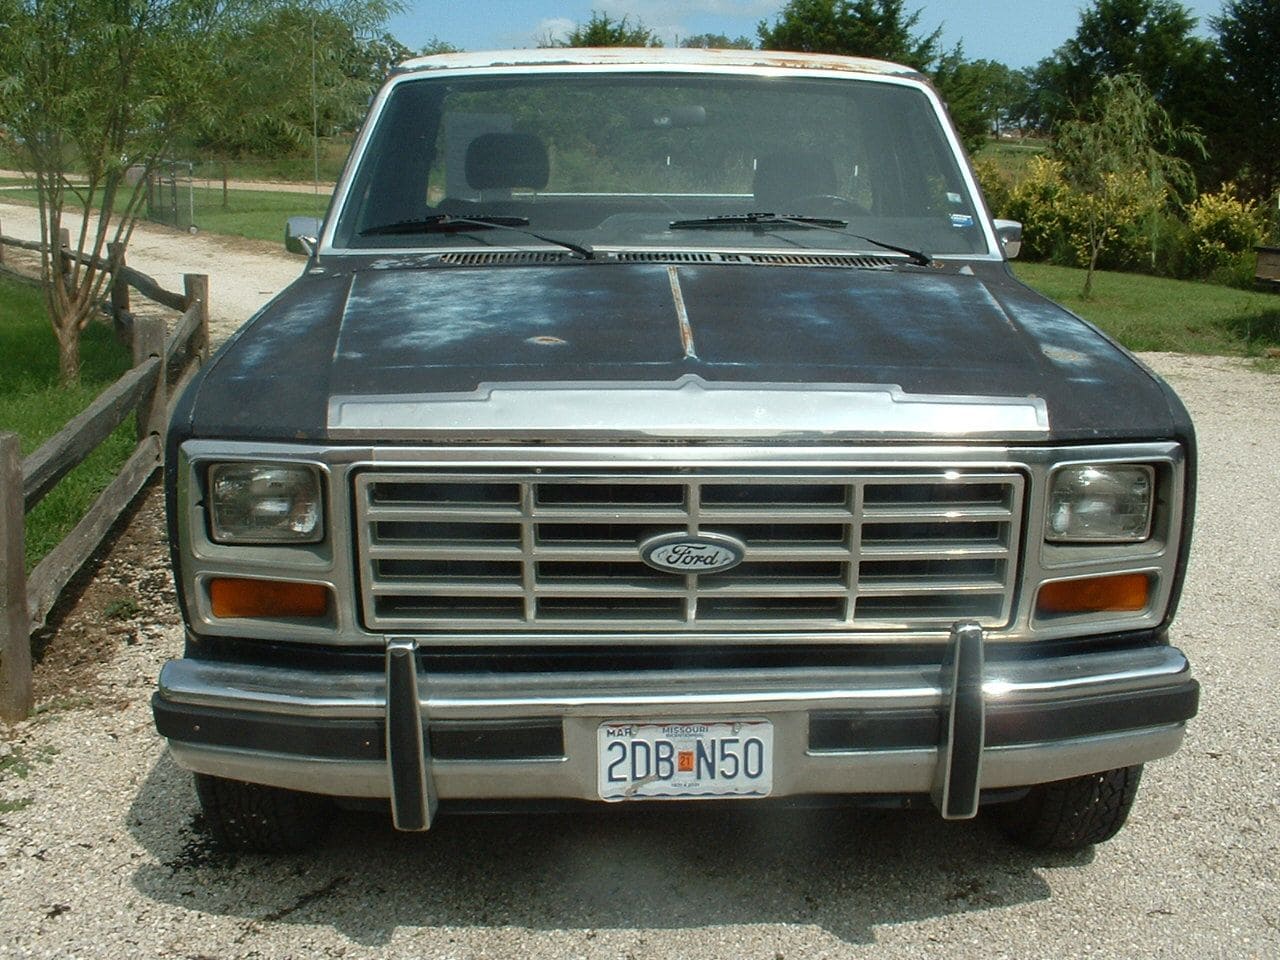 1986 Ford F-150 - 1986 F150 4.9L , c6 auto., 3.08 rear end ratio, Factory air cond. - Used - VIN 1FTDF15Y7GNA8 - 78,000 Miles - 6 cyl - 2WD - Automatic - Truck - Blue - Versailles, MO 65084, United States